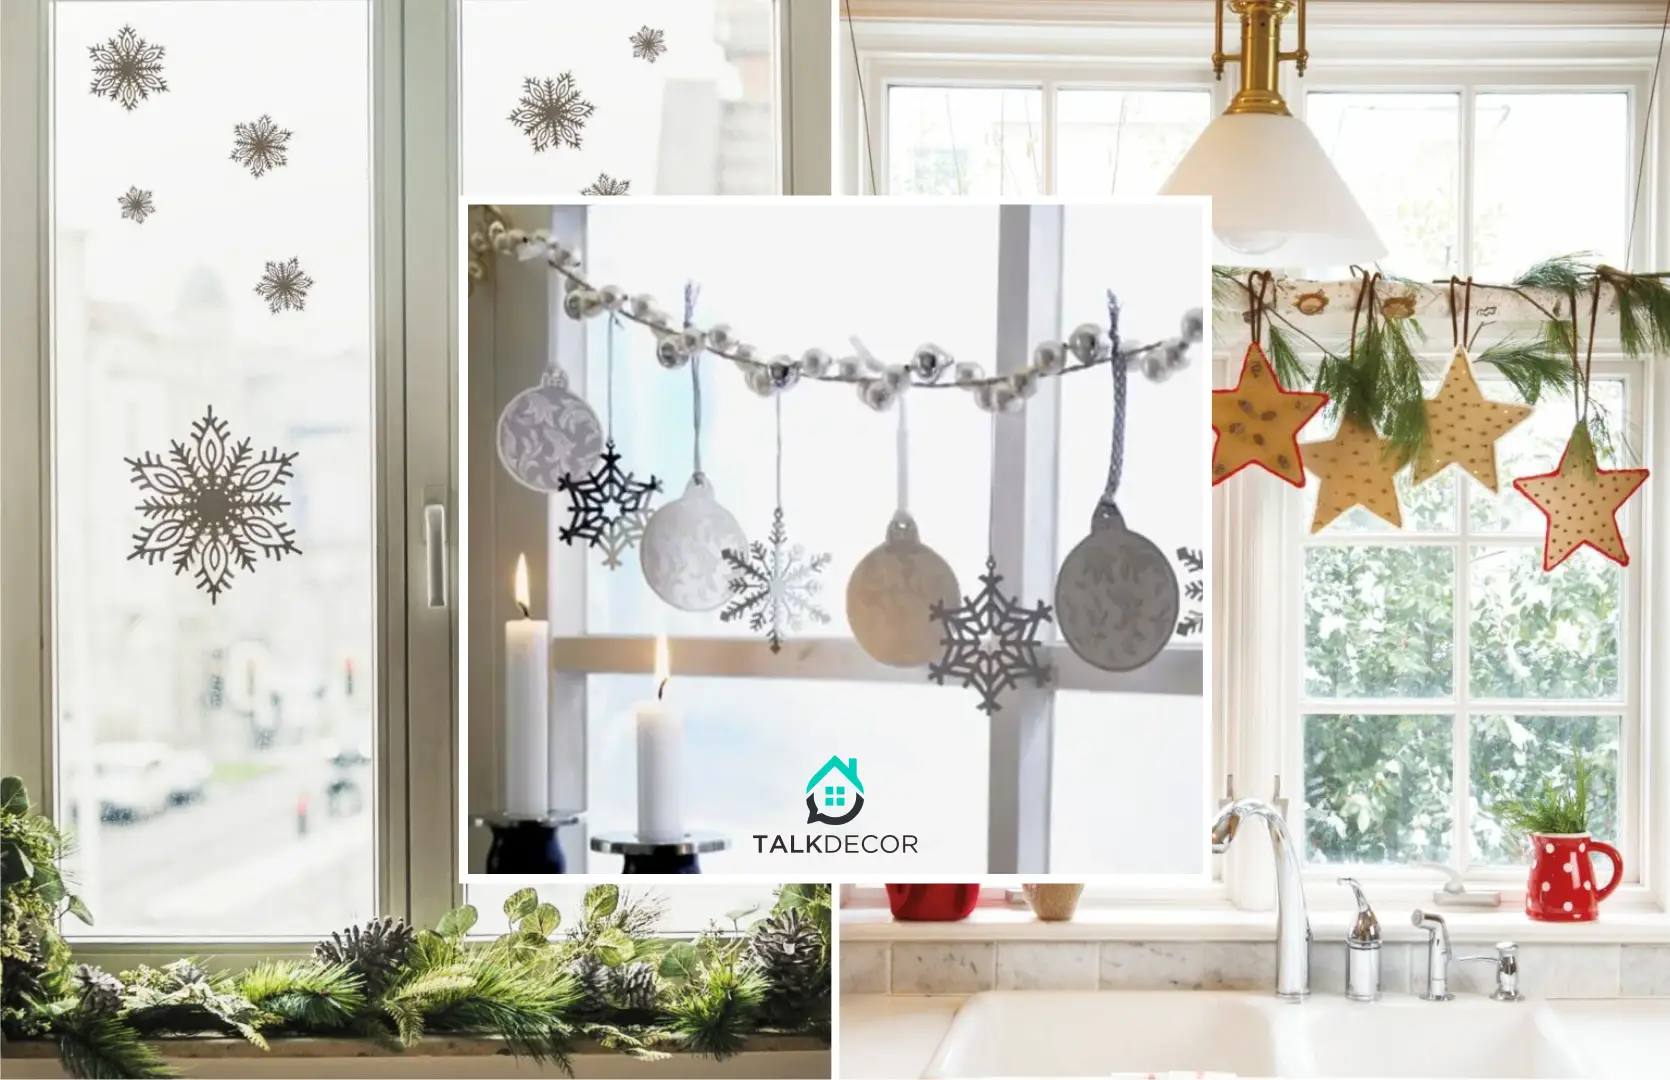 How to Do Window Dressing with Winter Touches